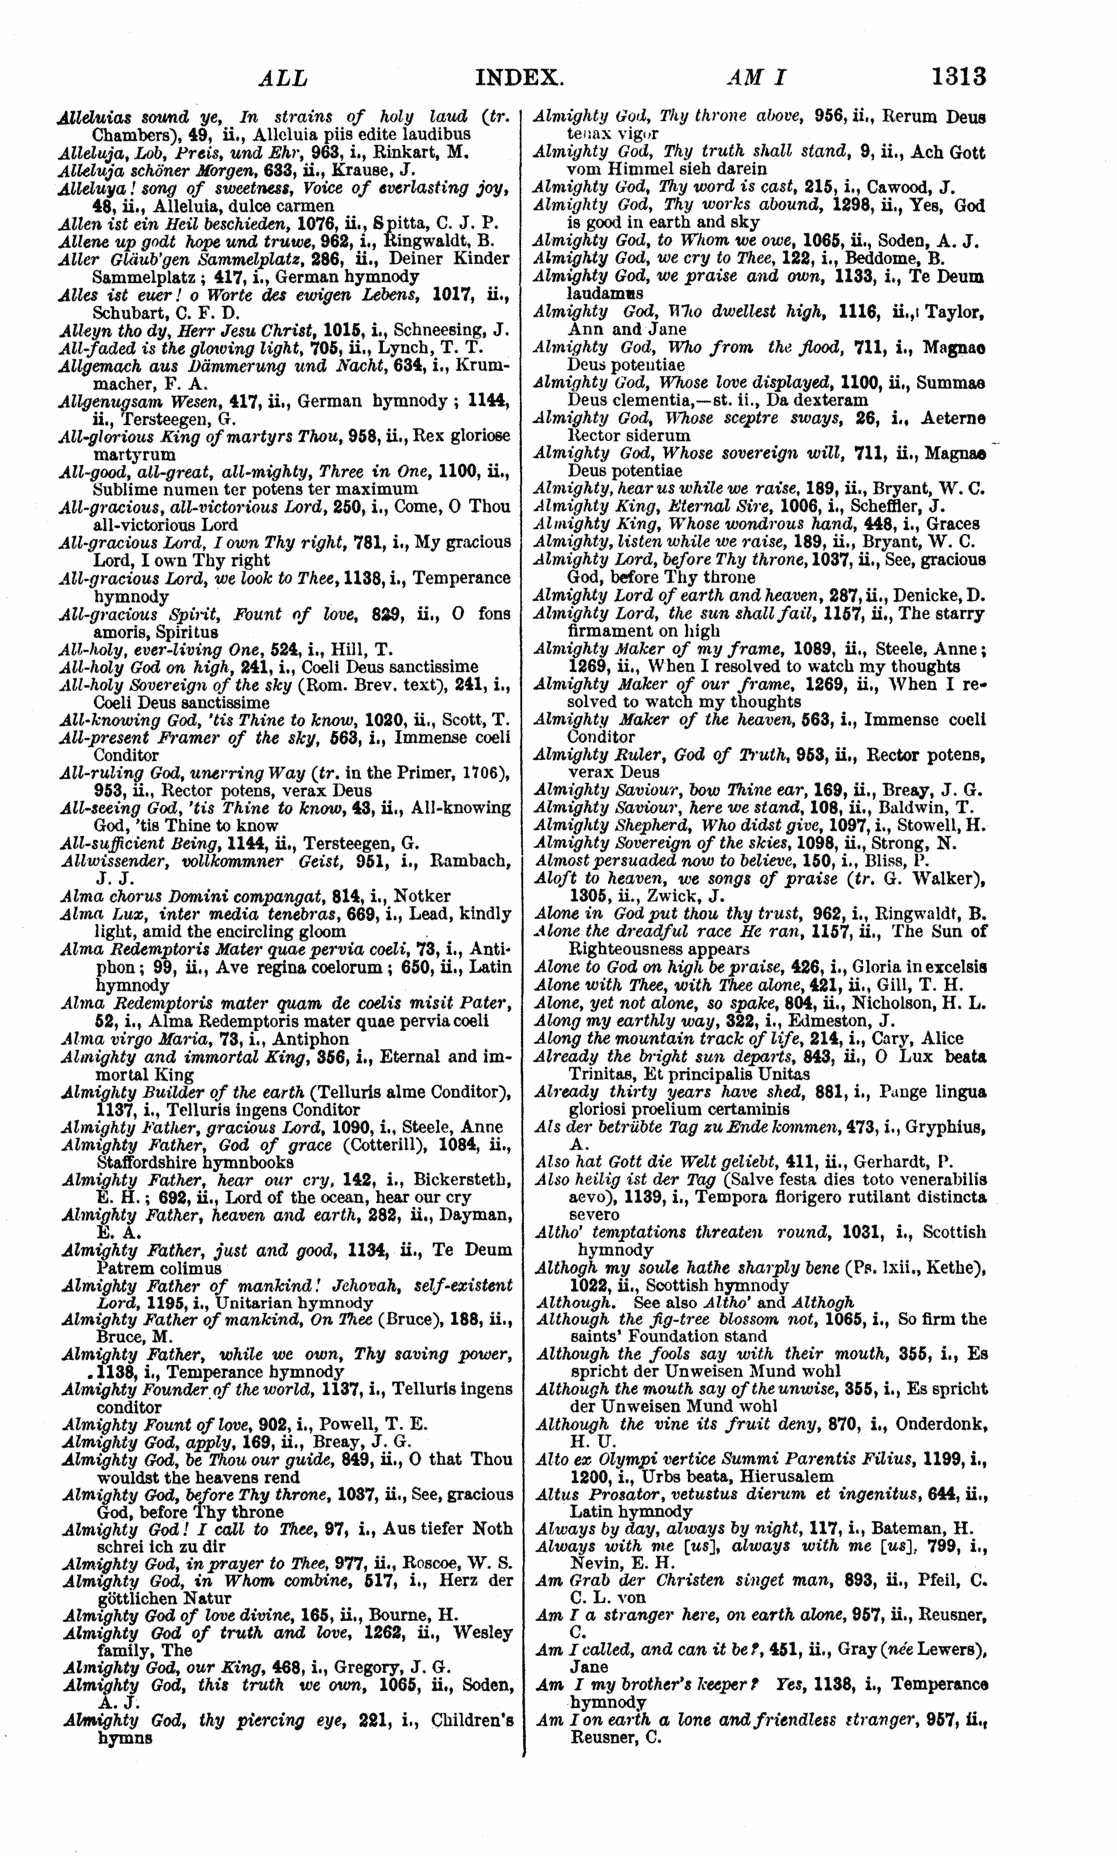 Image of page 1313